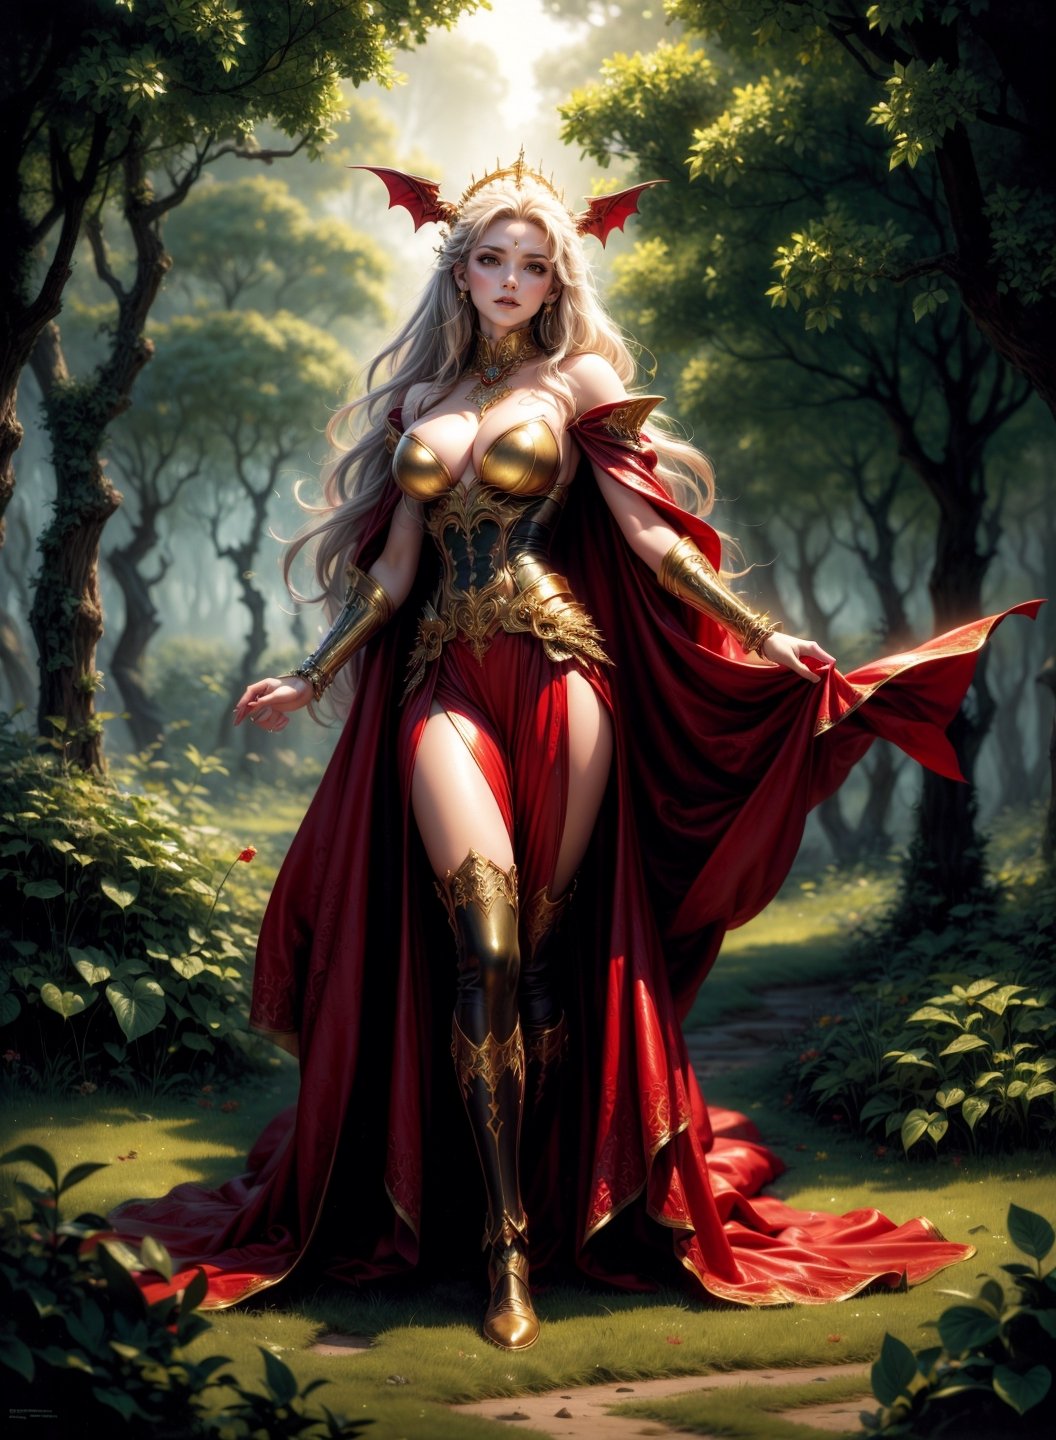 A vampire queen by Luis Royo, richly golden jeweled, fine red leather dressed, standing in majestic pose, greenery forest background